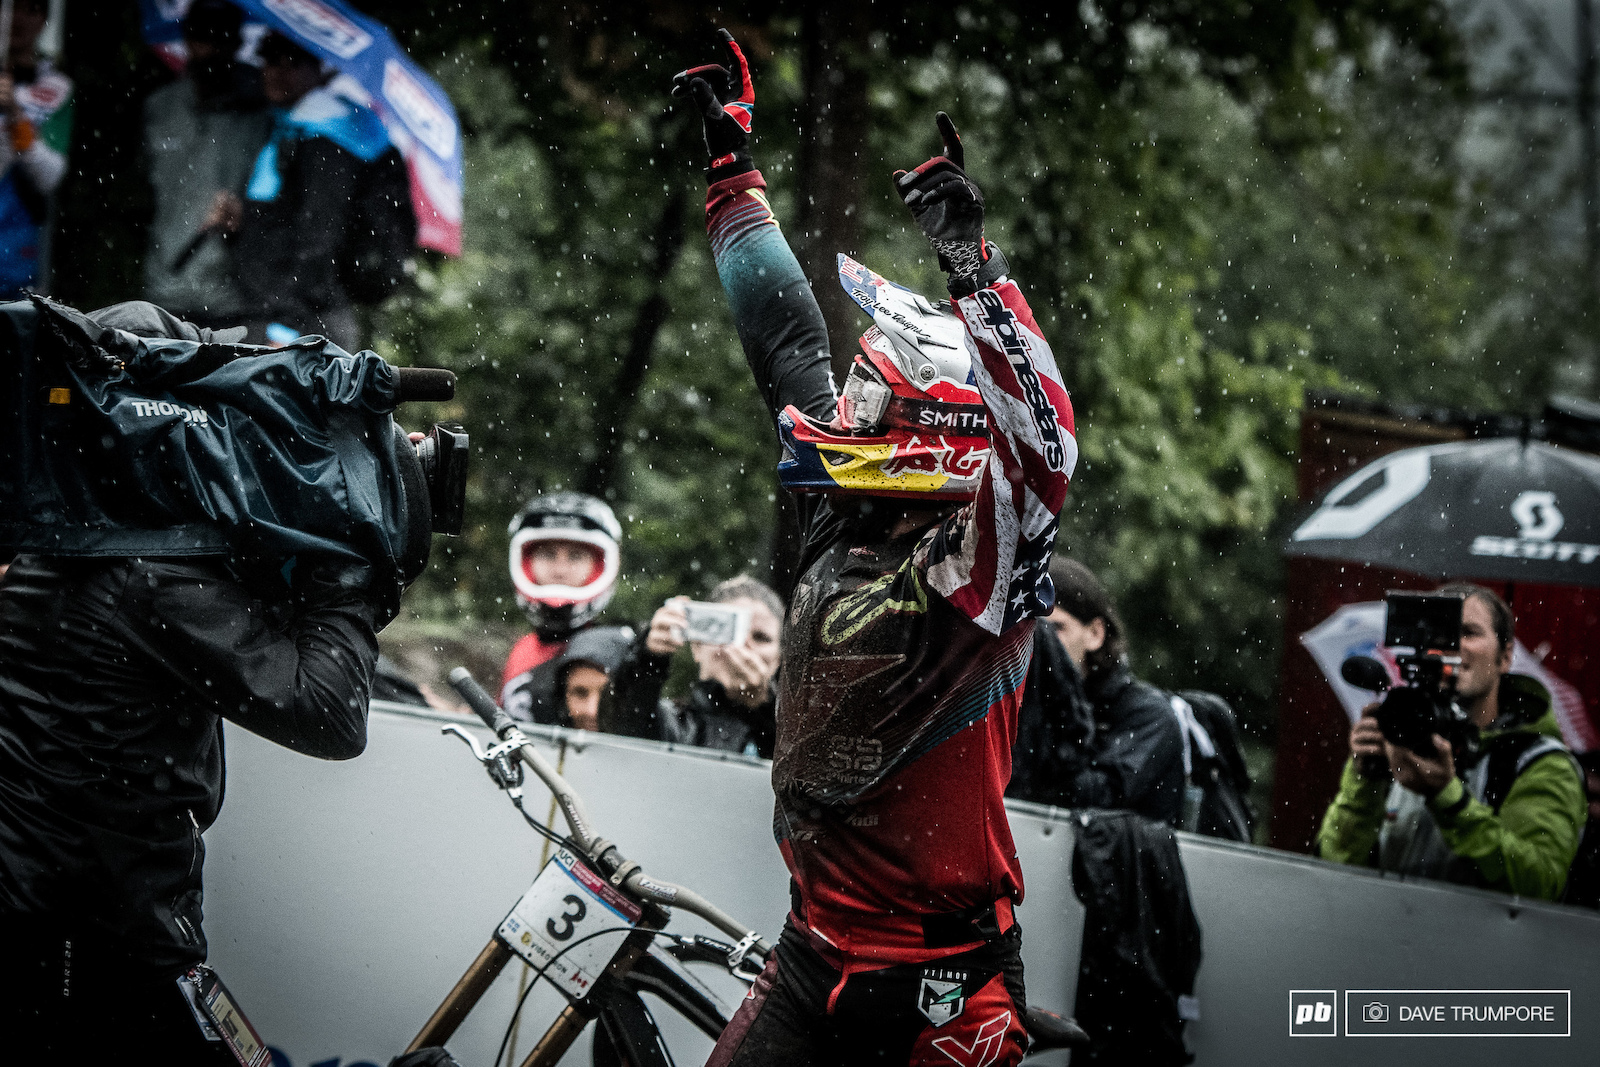 What a twist f fate for Aaron Gwin. After a puncture ruined his winning run last round in Lenzerheide it looked as if the weather was going to derail his plans again in Mont Sainte Anne. Gwin however was having none of it and put down one of the greatest runs of all time to do the impossible.